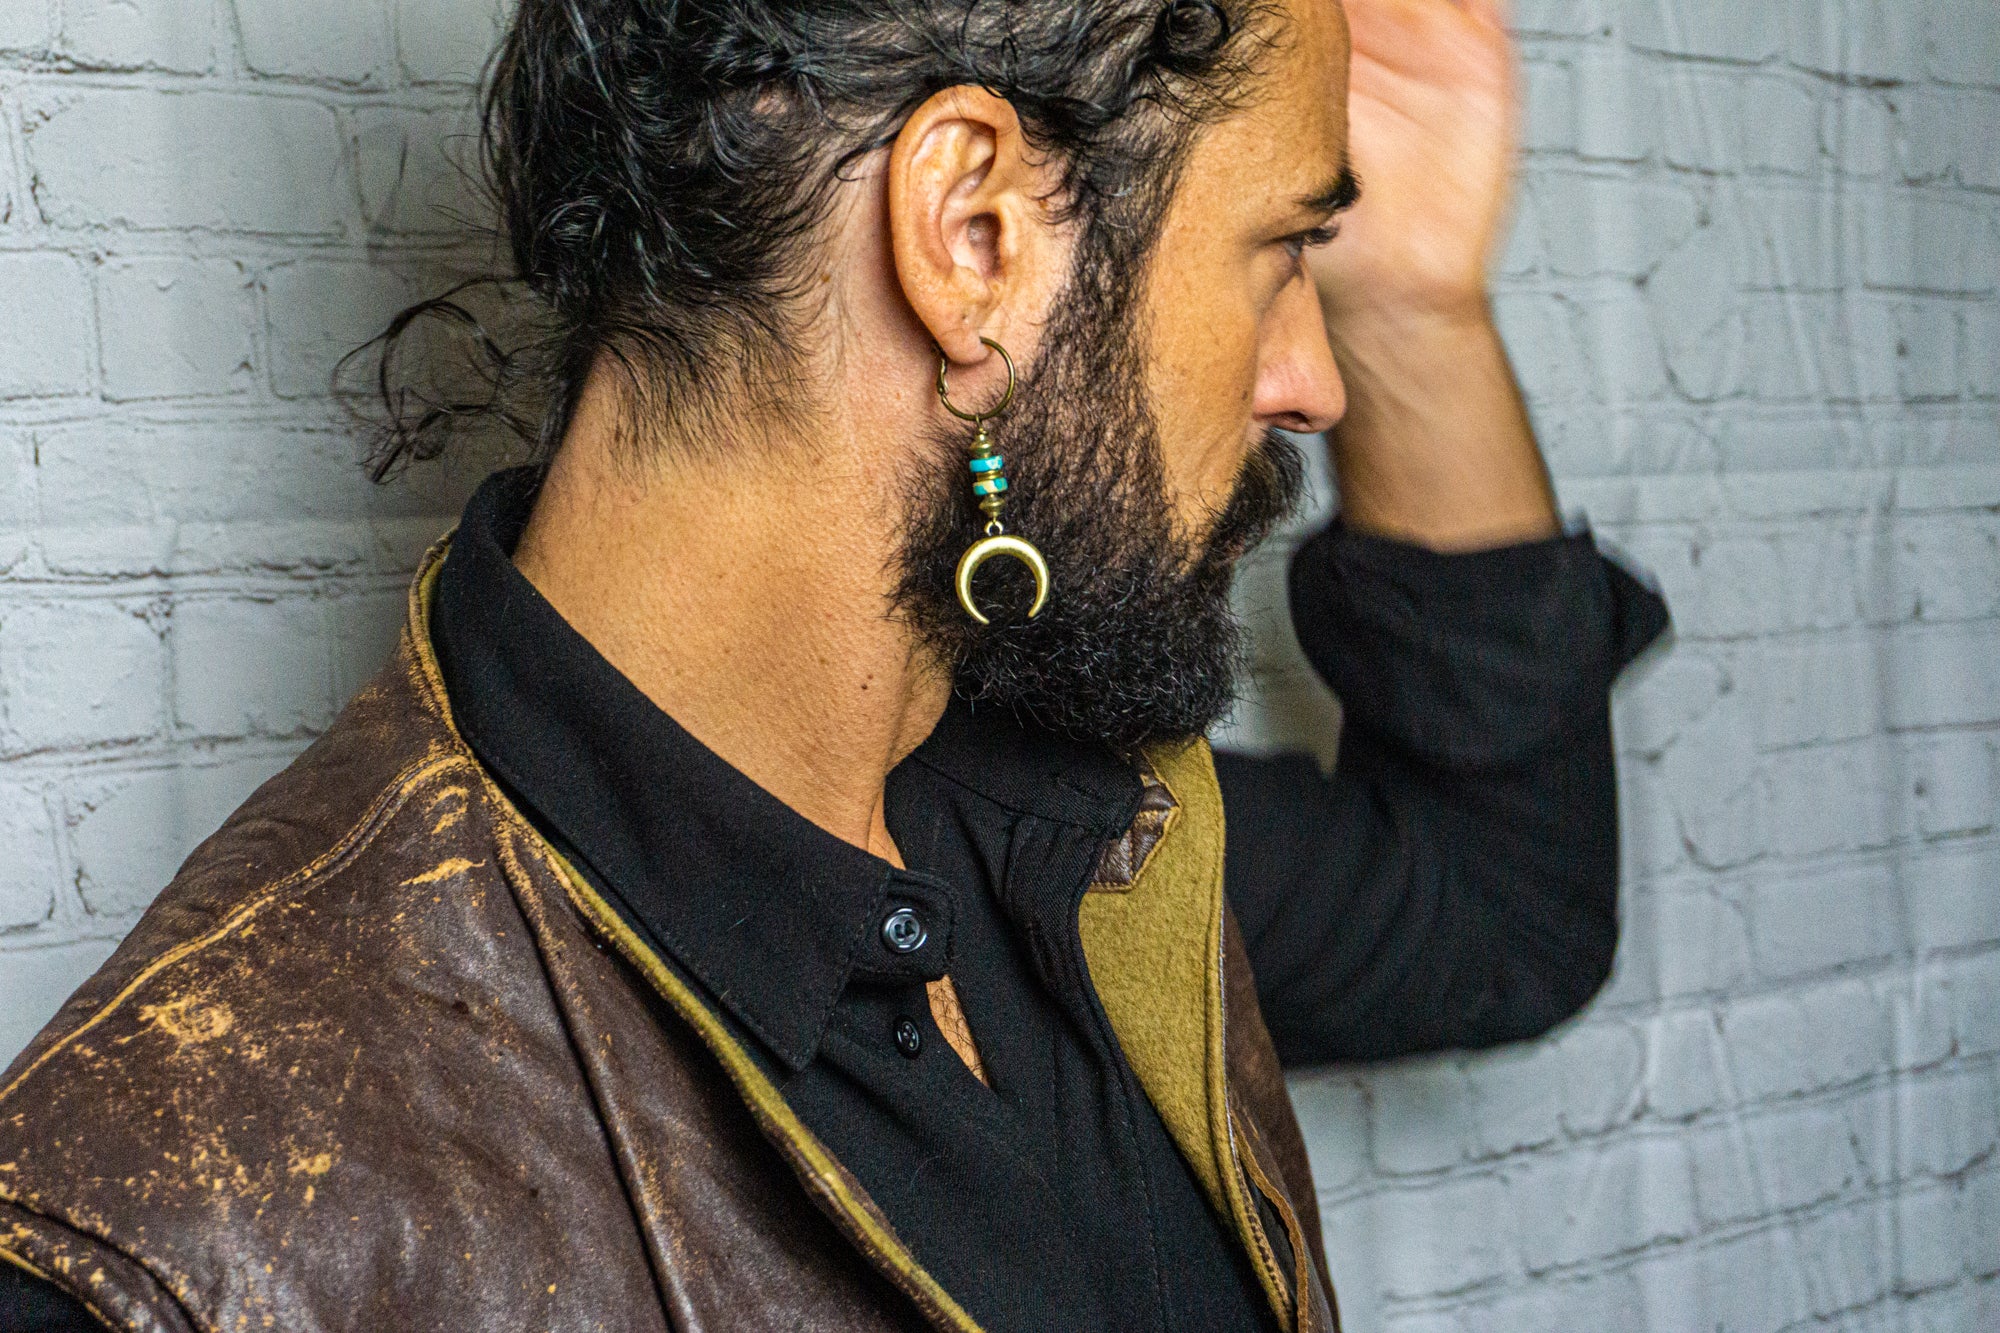 mens bronze hoop earring wit turquise gemstones and a crescent moon  charm- wander jewellery